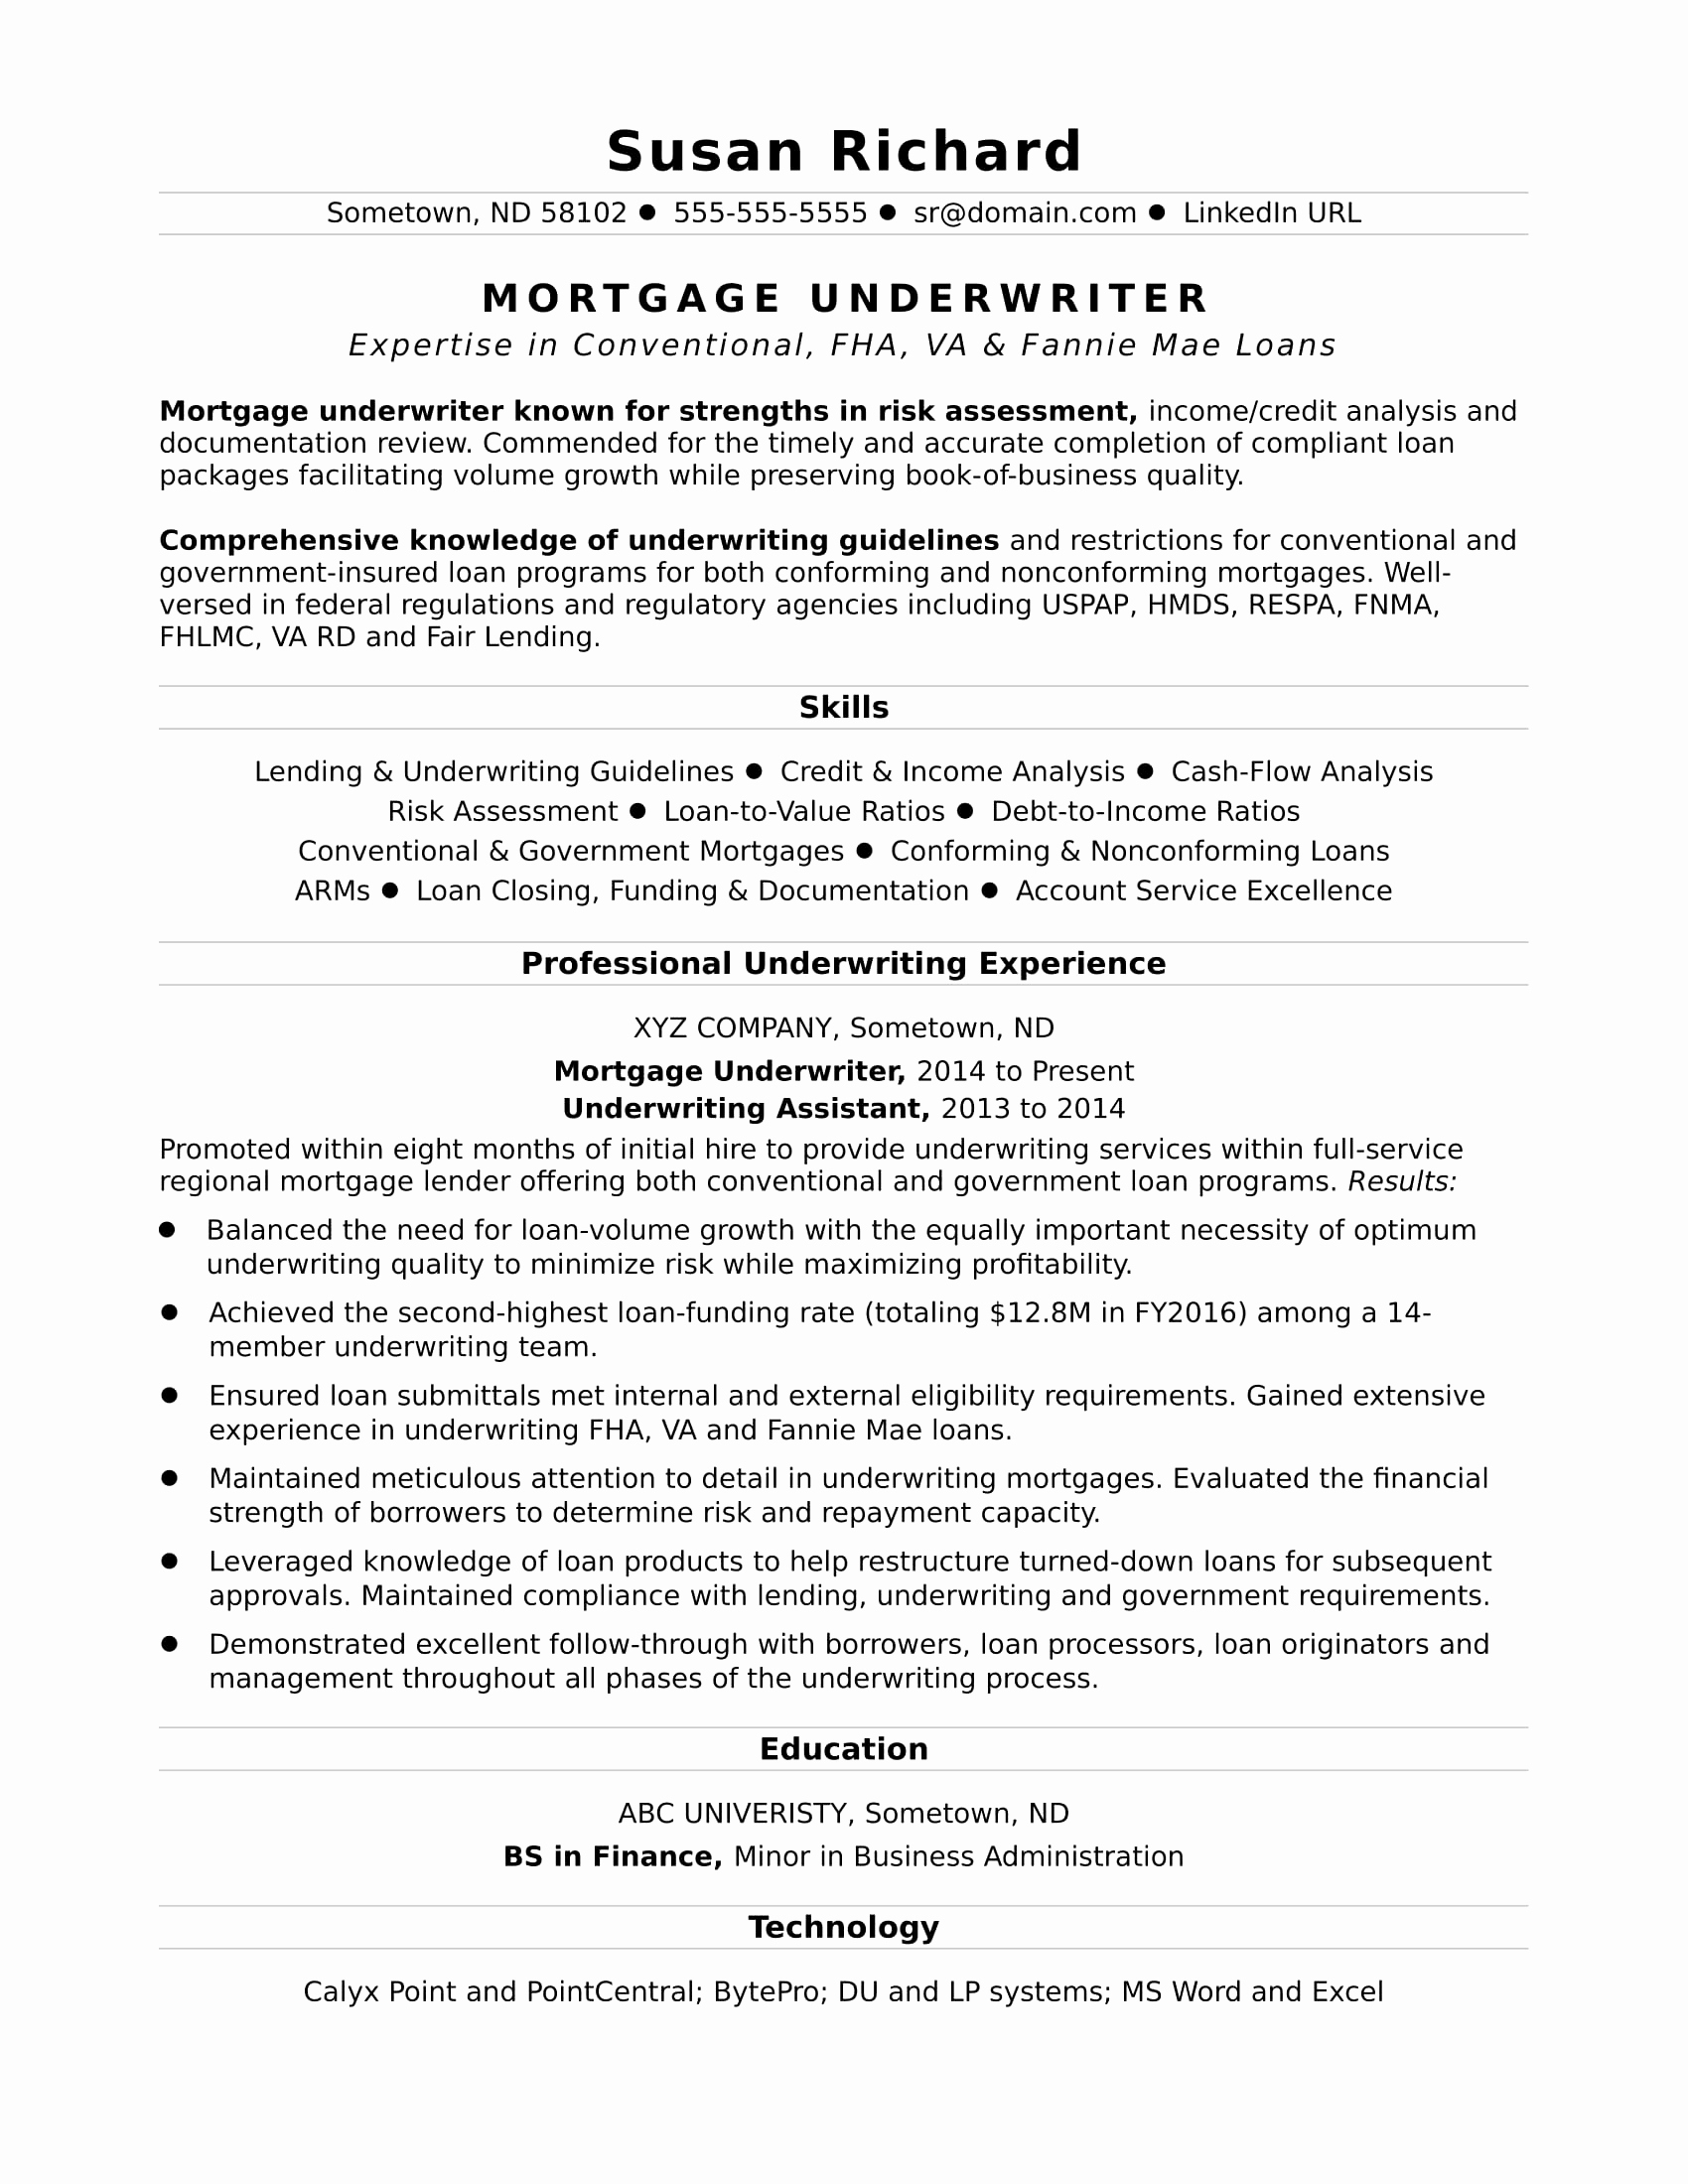 Free Online Cover Letter Template - Cover Letter or Application Letter